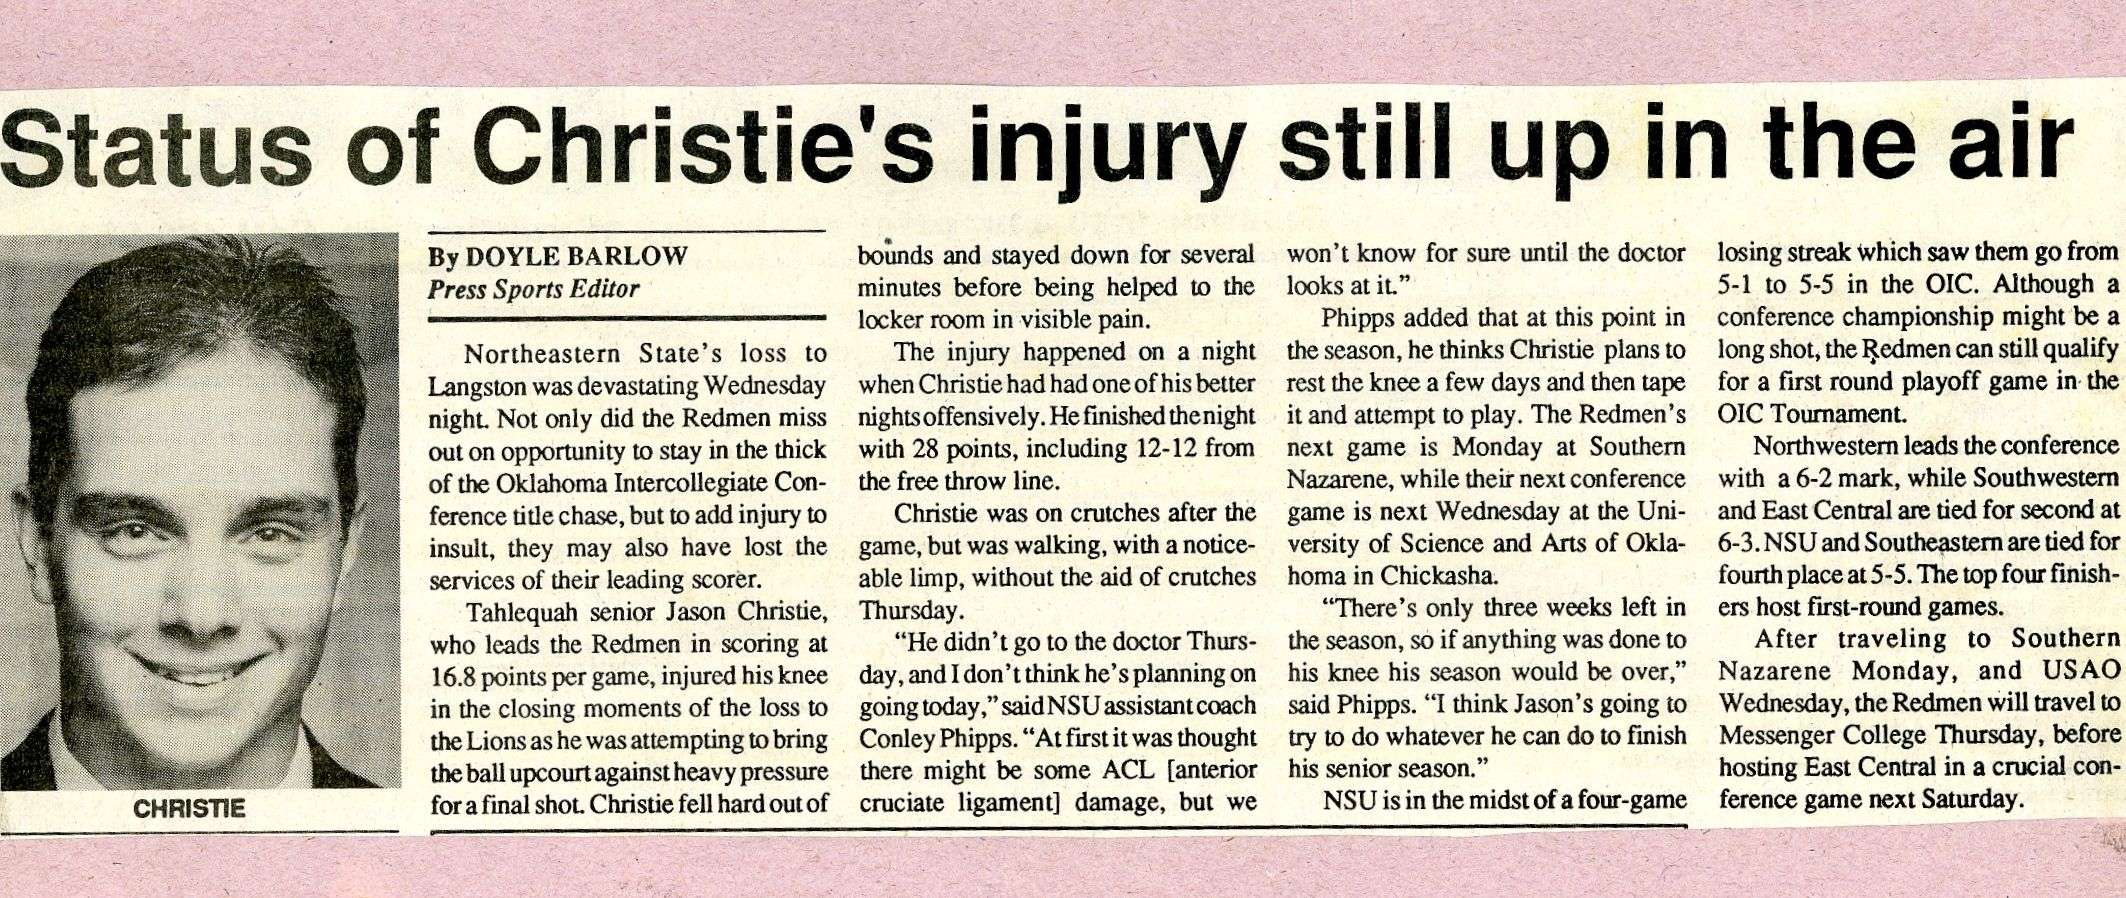 As a testament to Christie's toughness, you've got to love this quote from his coach after Christie suffered a late-season knee injury: 